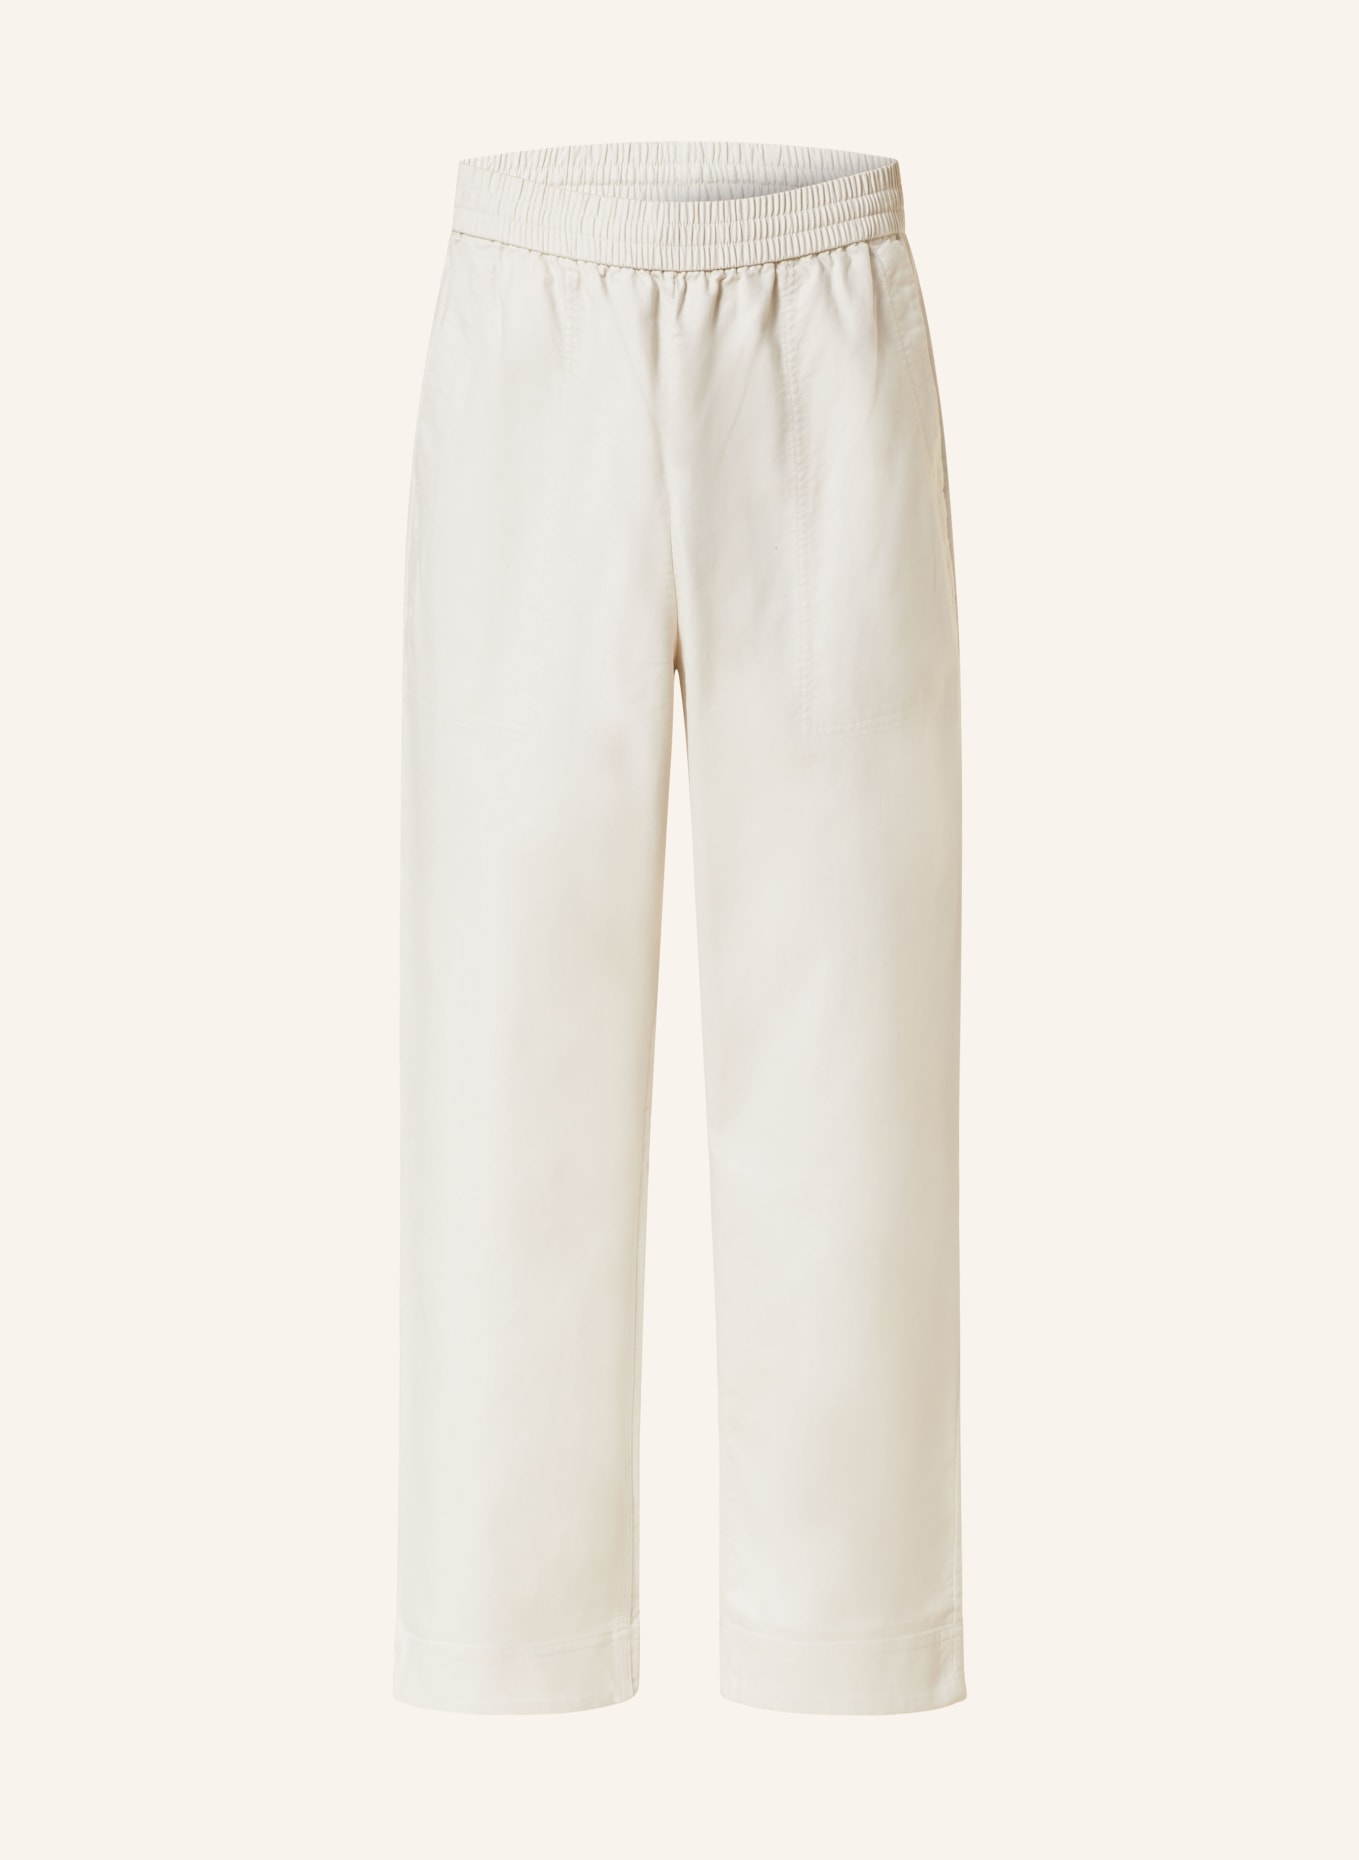 COS Hose Relaxed Fit, Farbe: CREME (Bild 1)